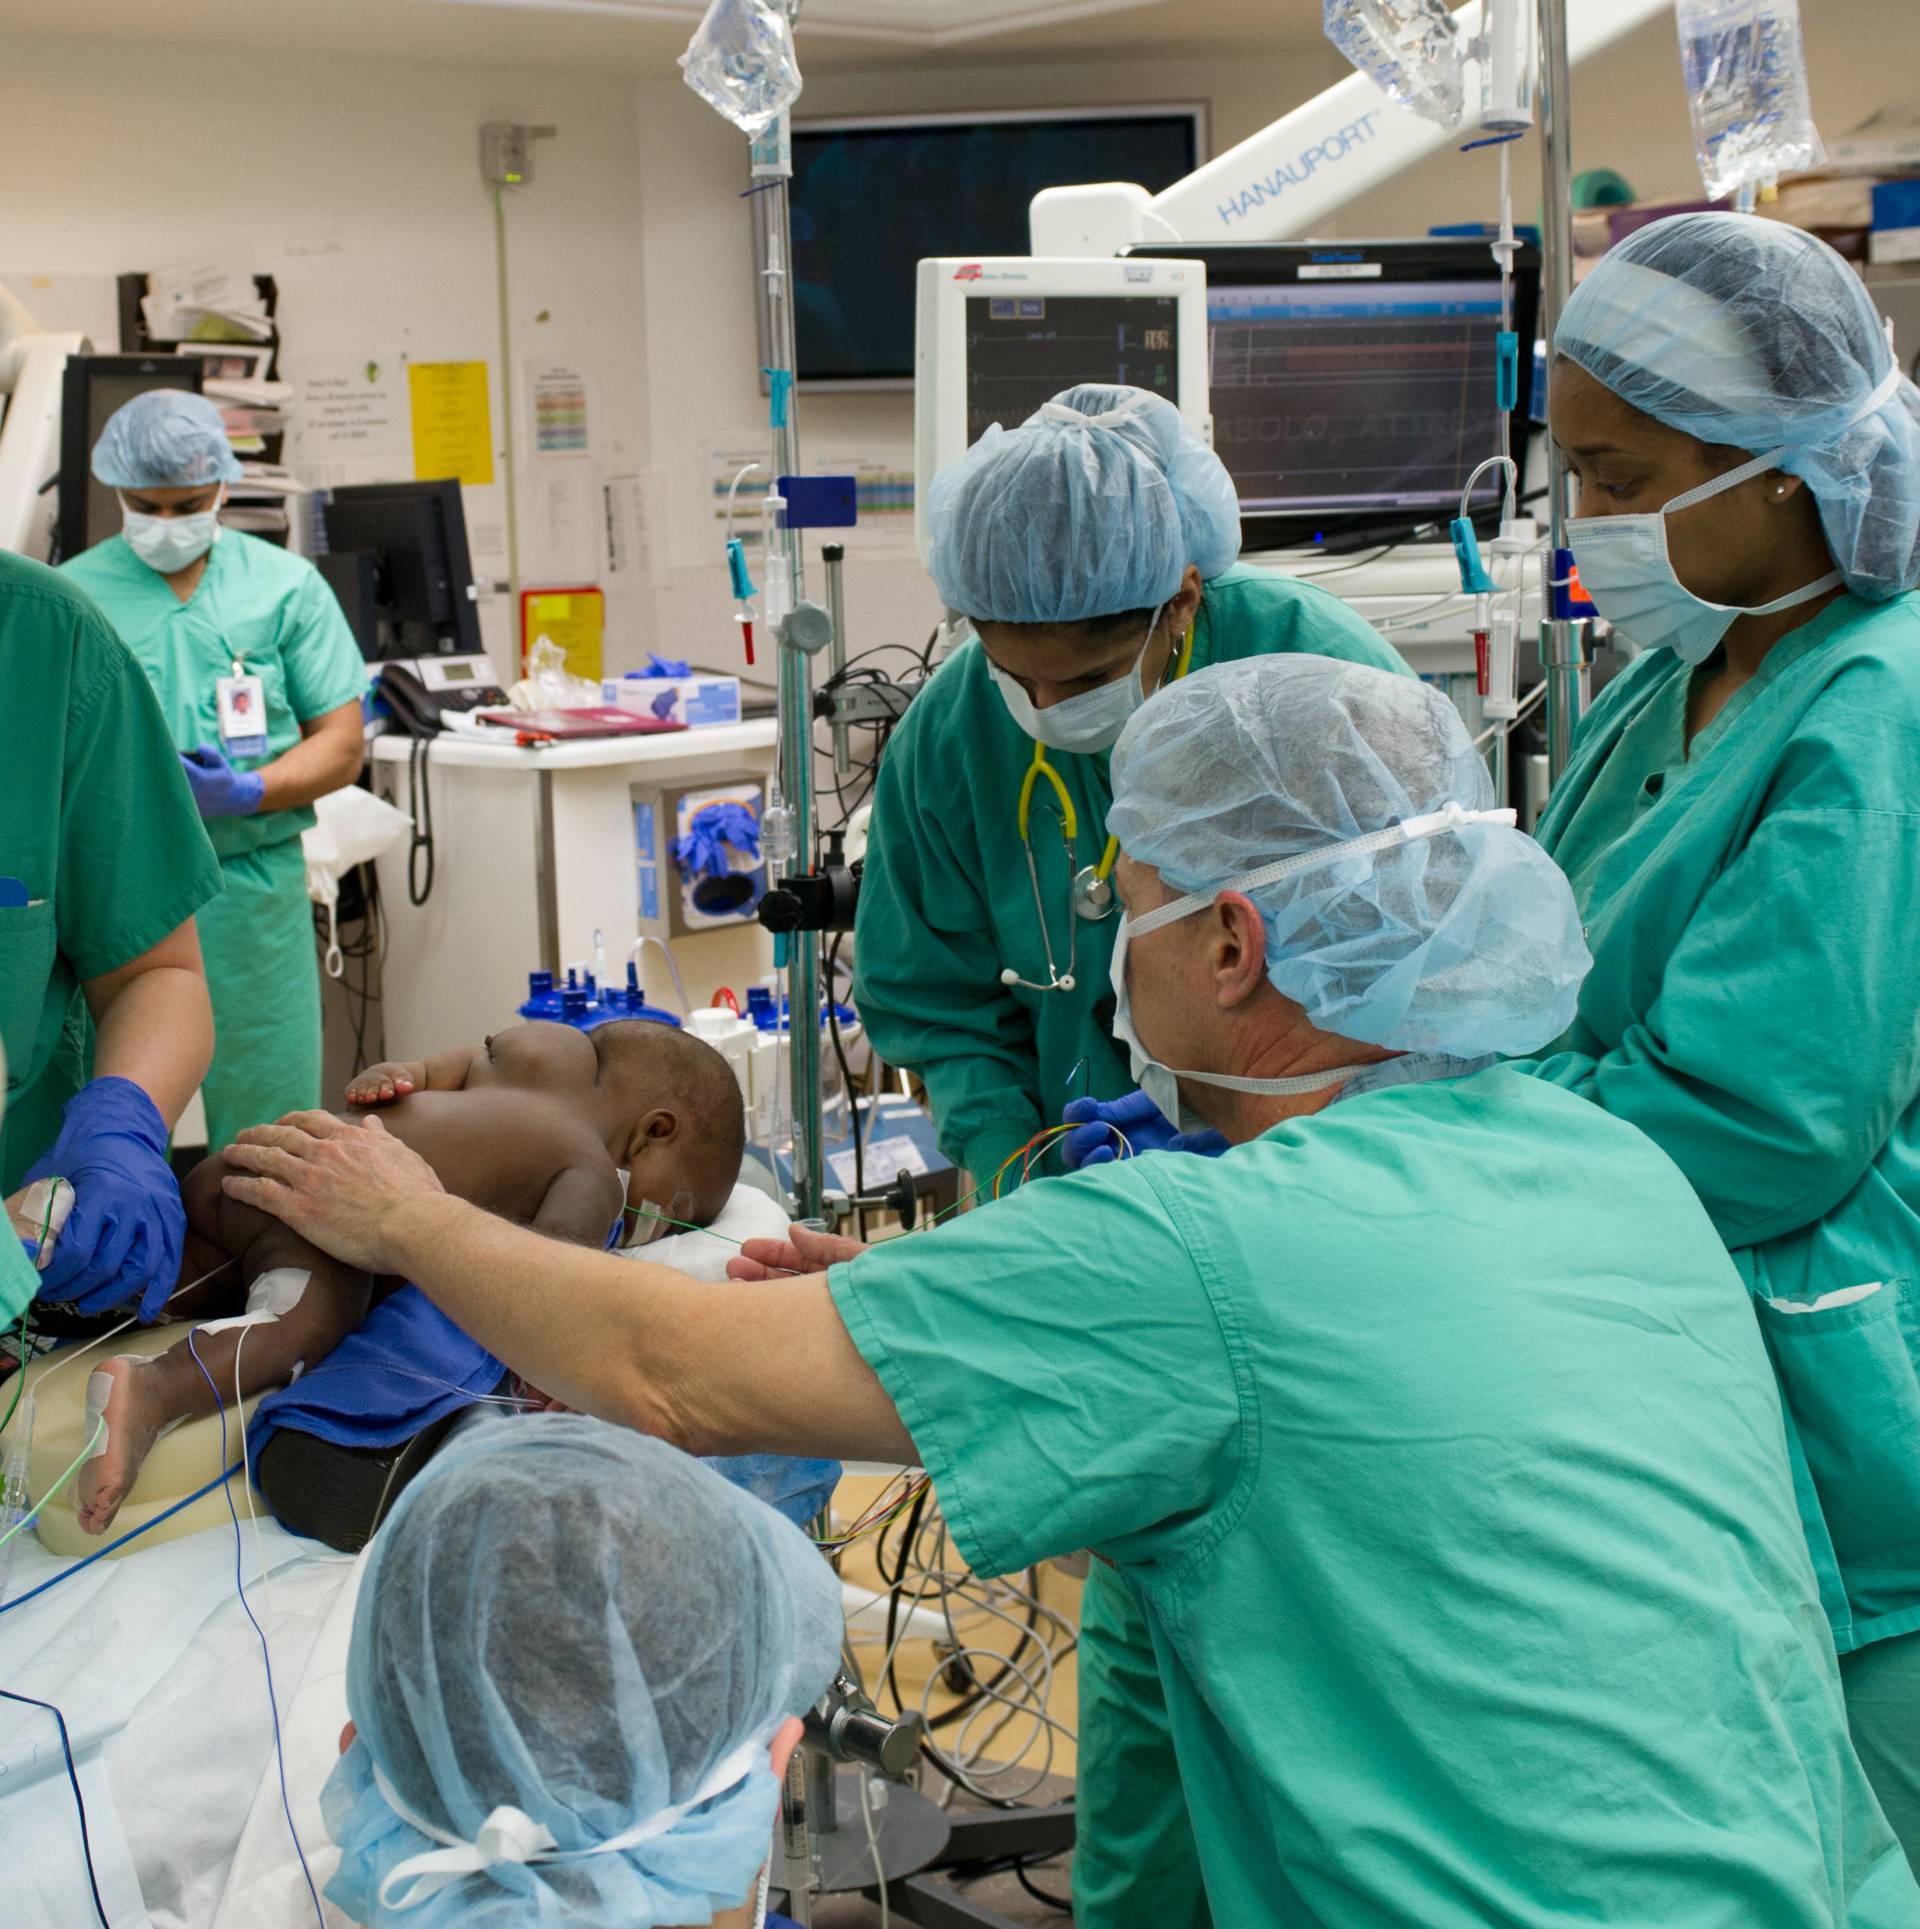 Hospital staff prepare 10-month old "Baby Dominique" for surgery to treat the infant born with four legs and two spines at Advocate Children's Hospital in Park Ridge, Illinois